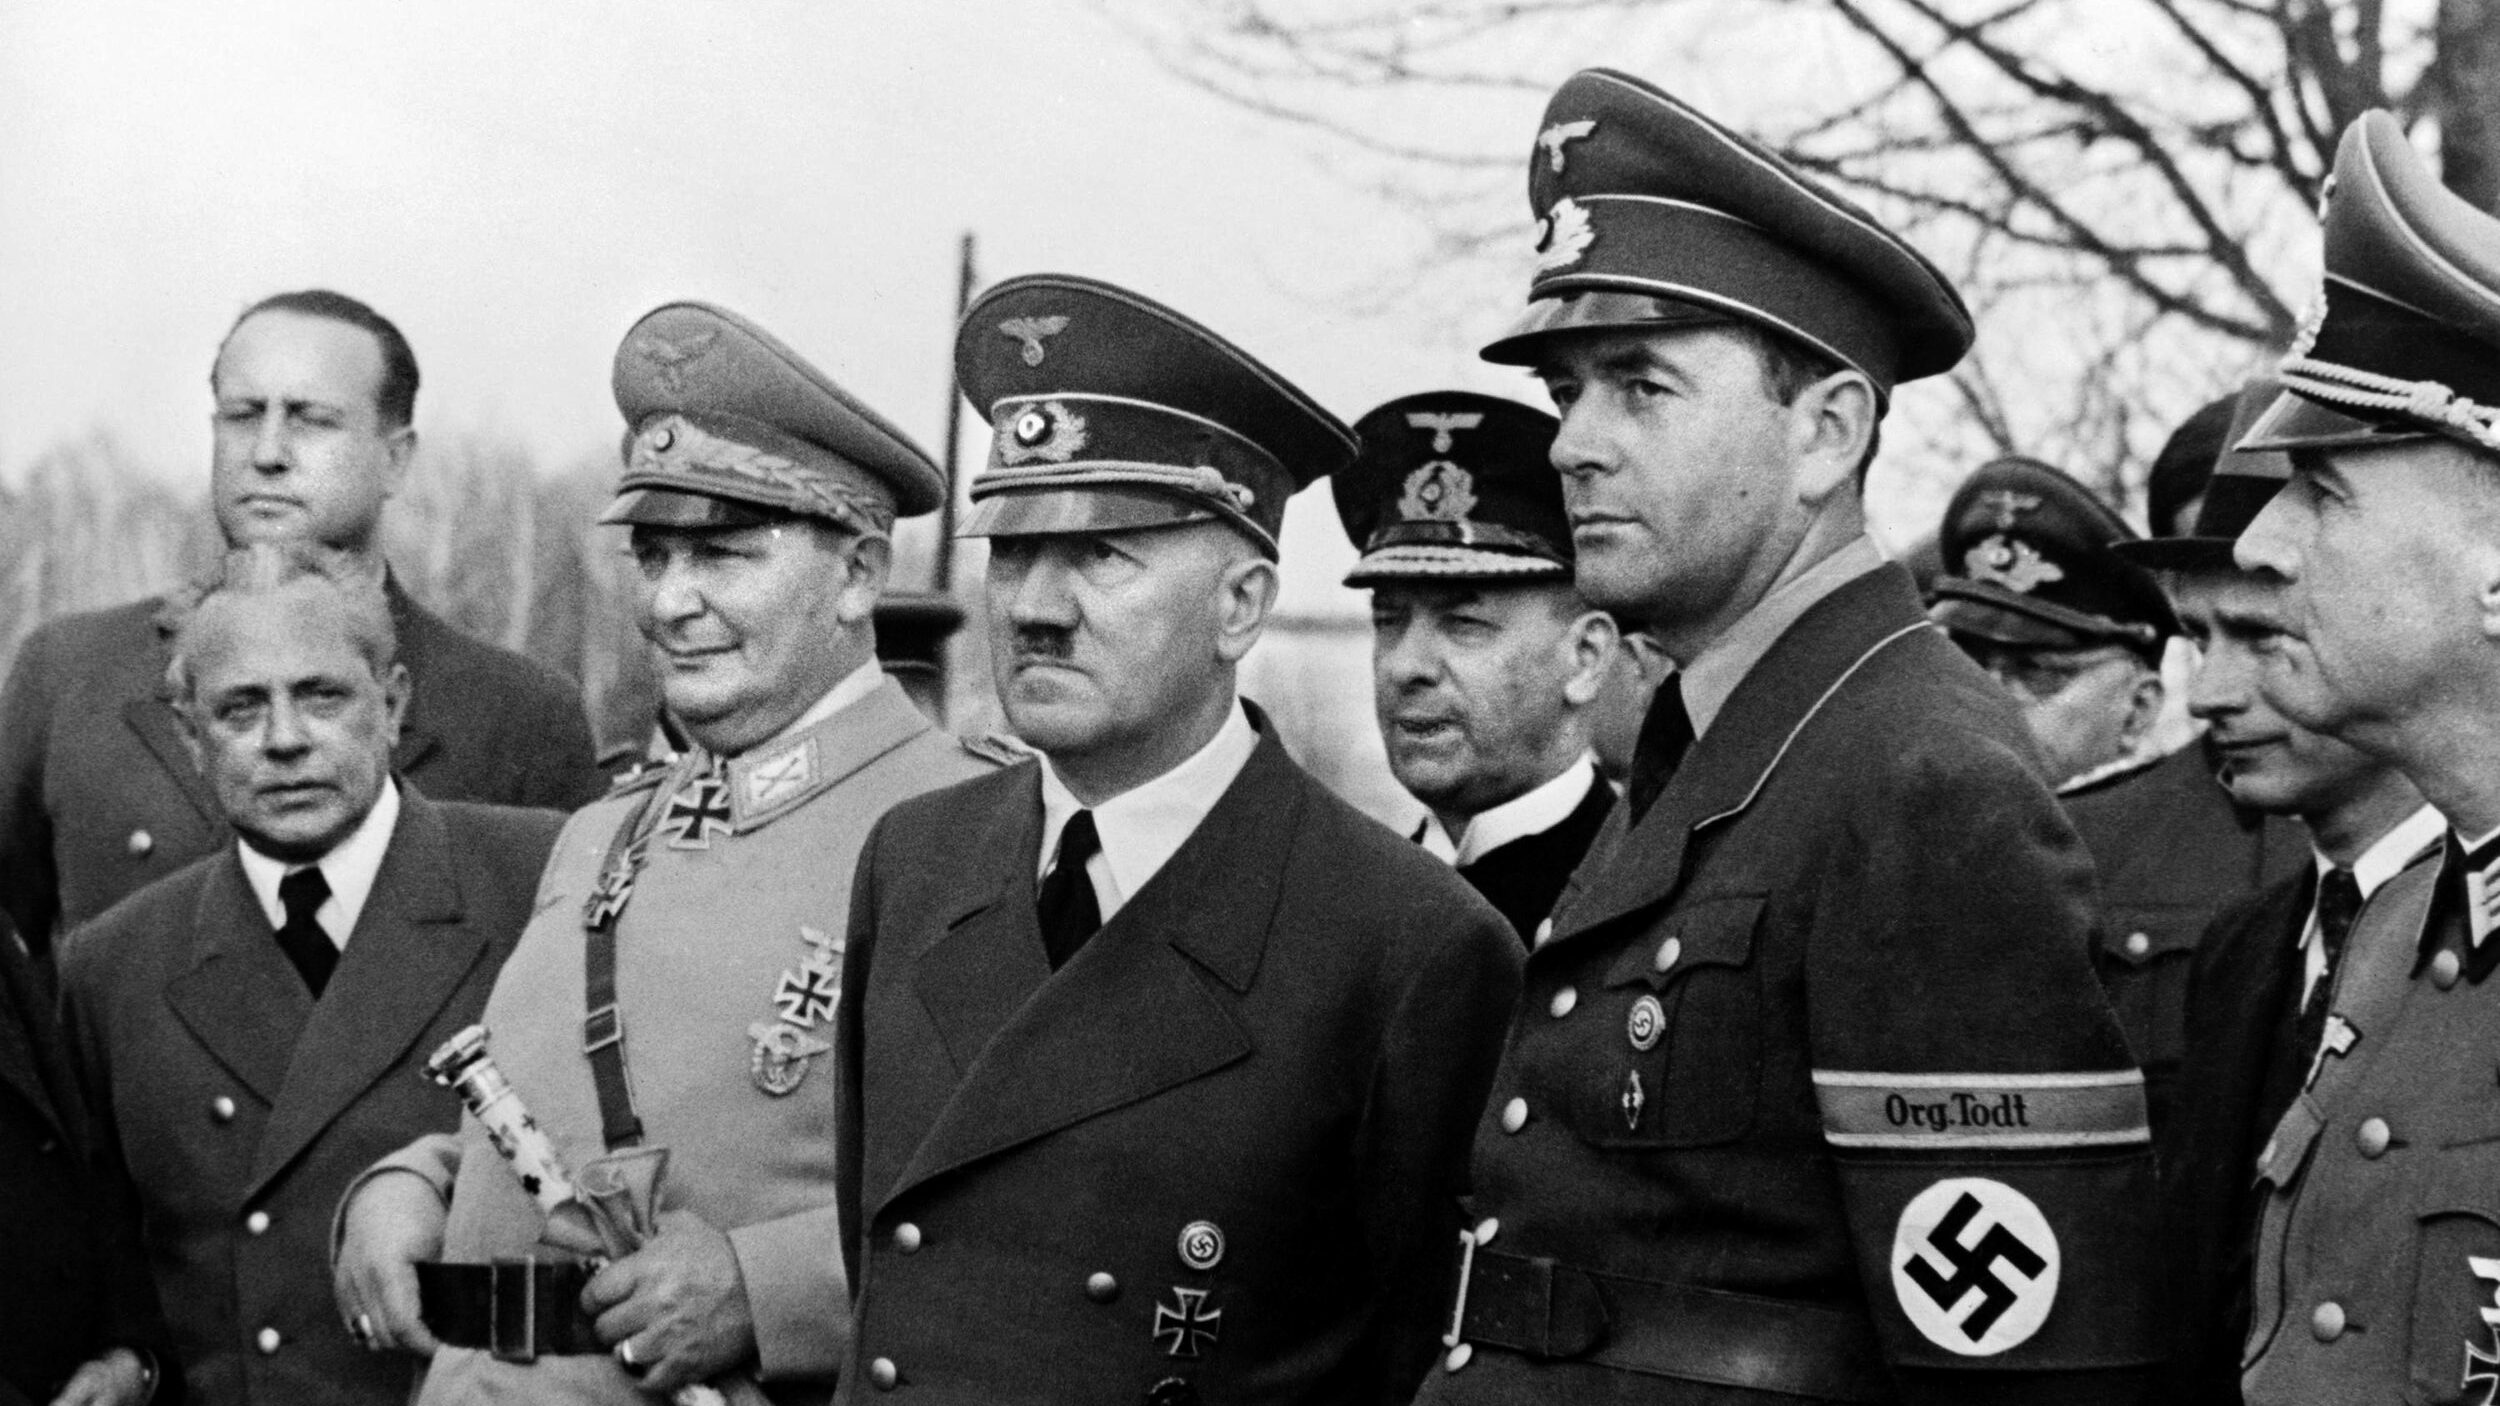 Adolf Hitler flanked by two of his top lieutenants, Reich Minister of Armaments Albert Speer to his left, and Reichsmarschall Hermann Göring, chief of the Luftwaffe on his right. Göring was sometimes vexed by the activities of his “good” brother, Albert.